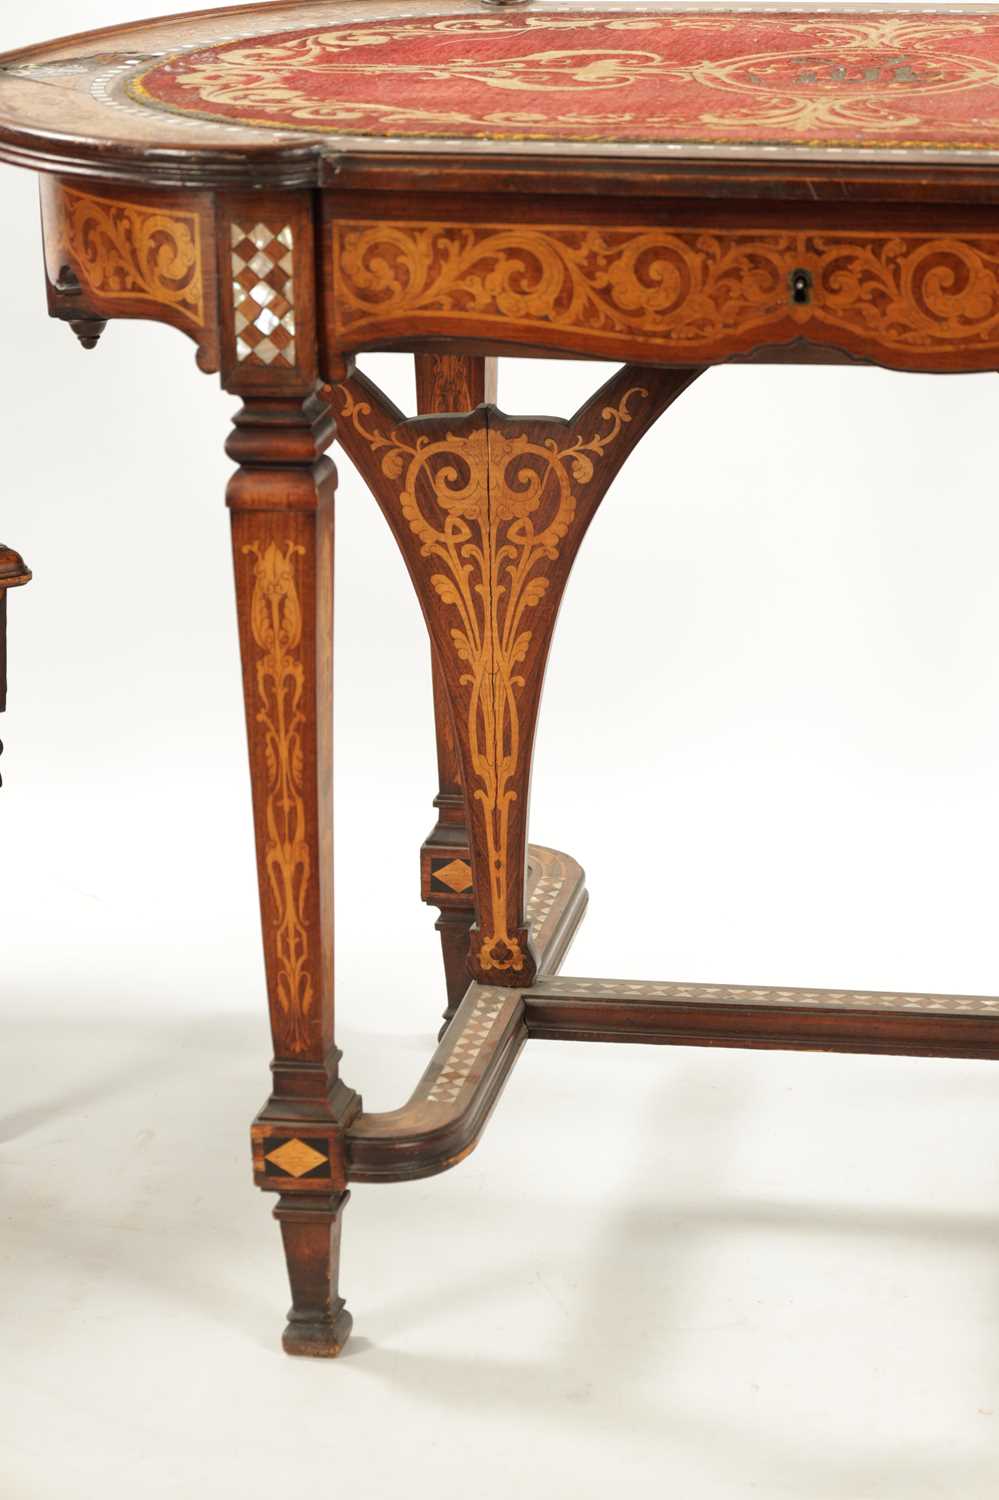 AN ART NOUVEAU OTTOMAN ISLAMIC STYLE WRITING TABLE AND TWO CHAIRS - Image 6 of 12